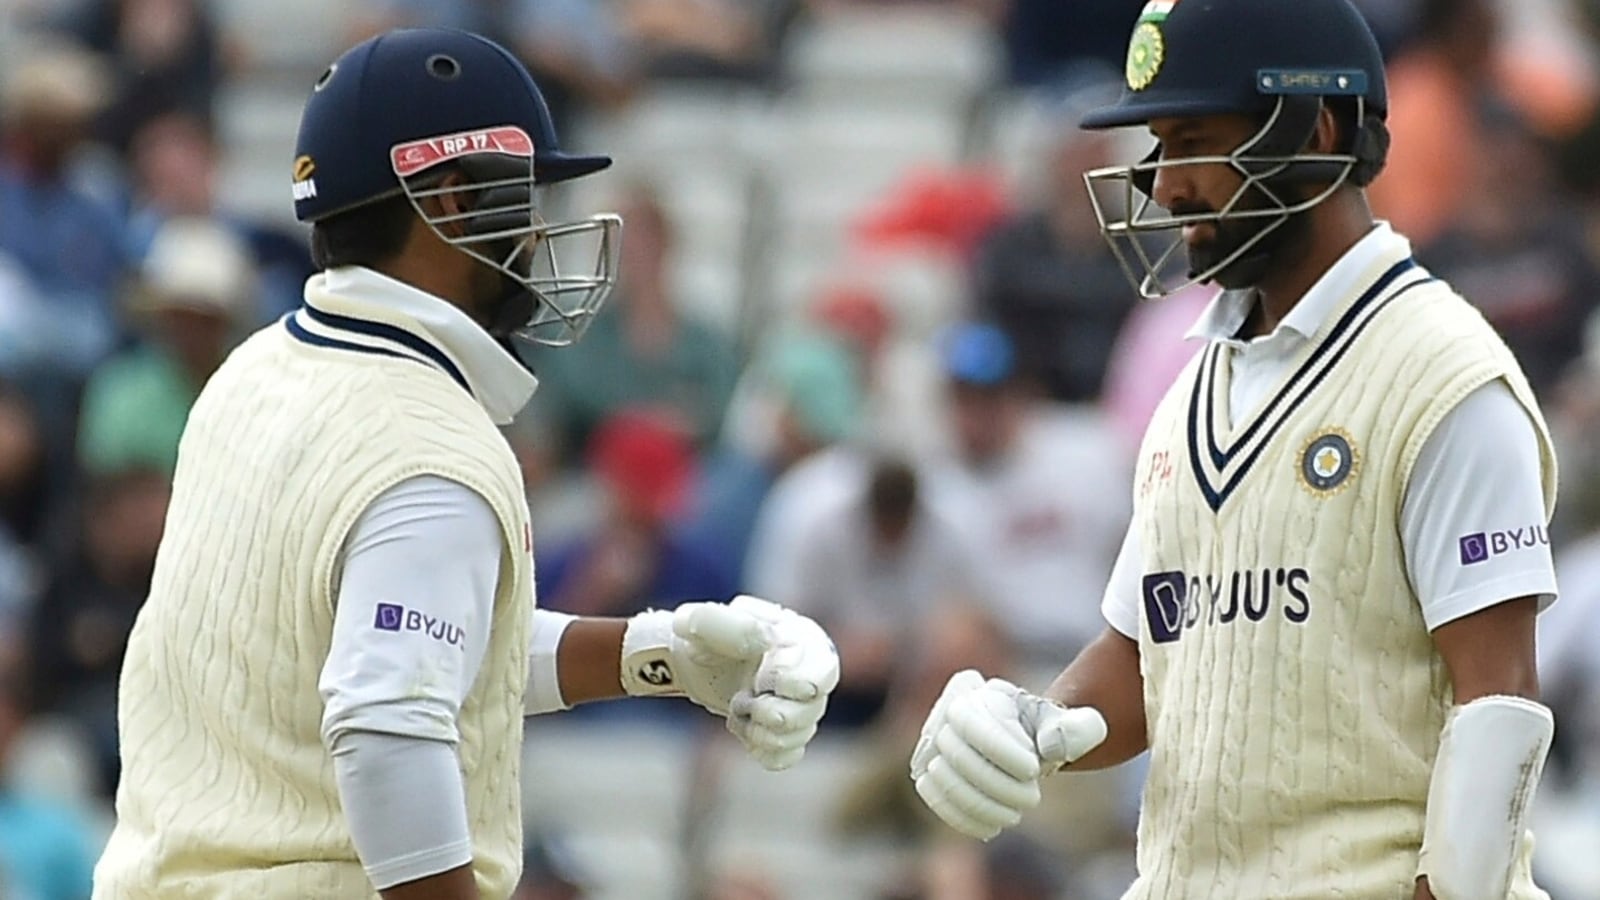 India vs England Highlights, 5th Test Day 3: Pujara hits fifty, Pant in control; IND lead by 257 runs at stumps